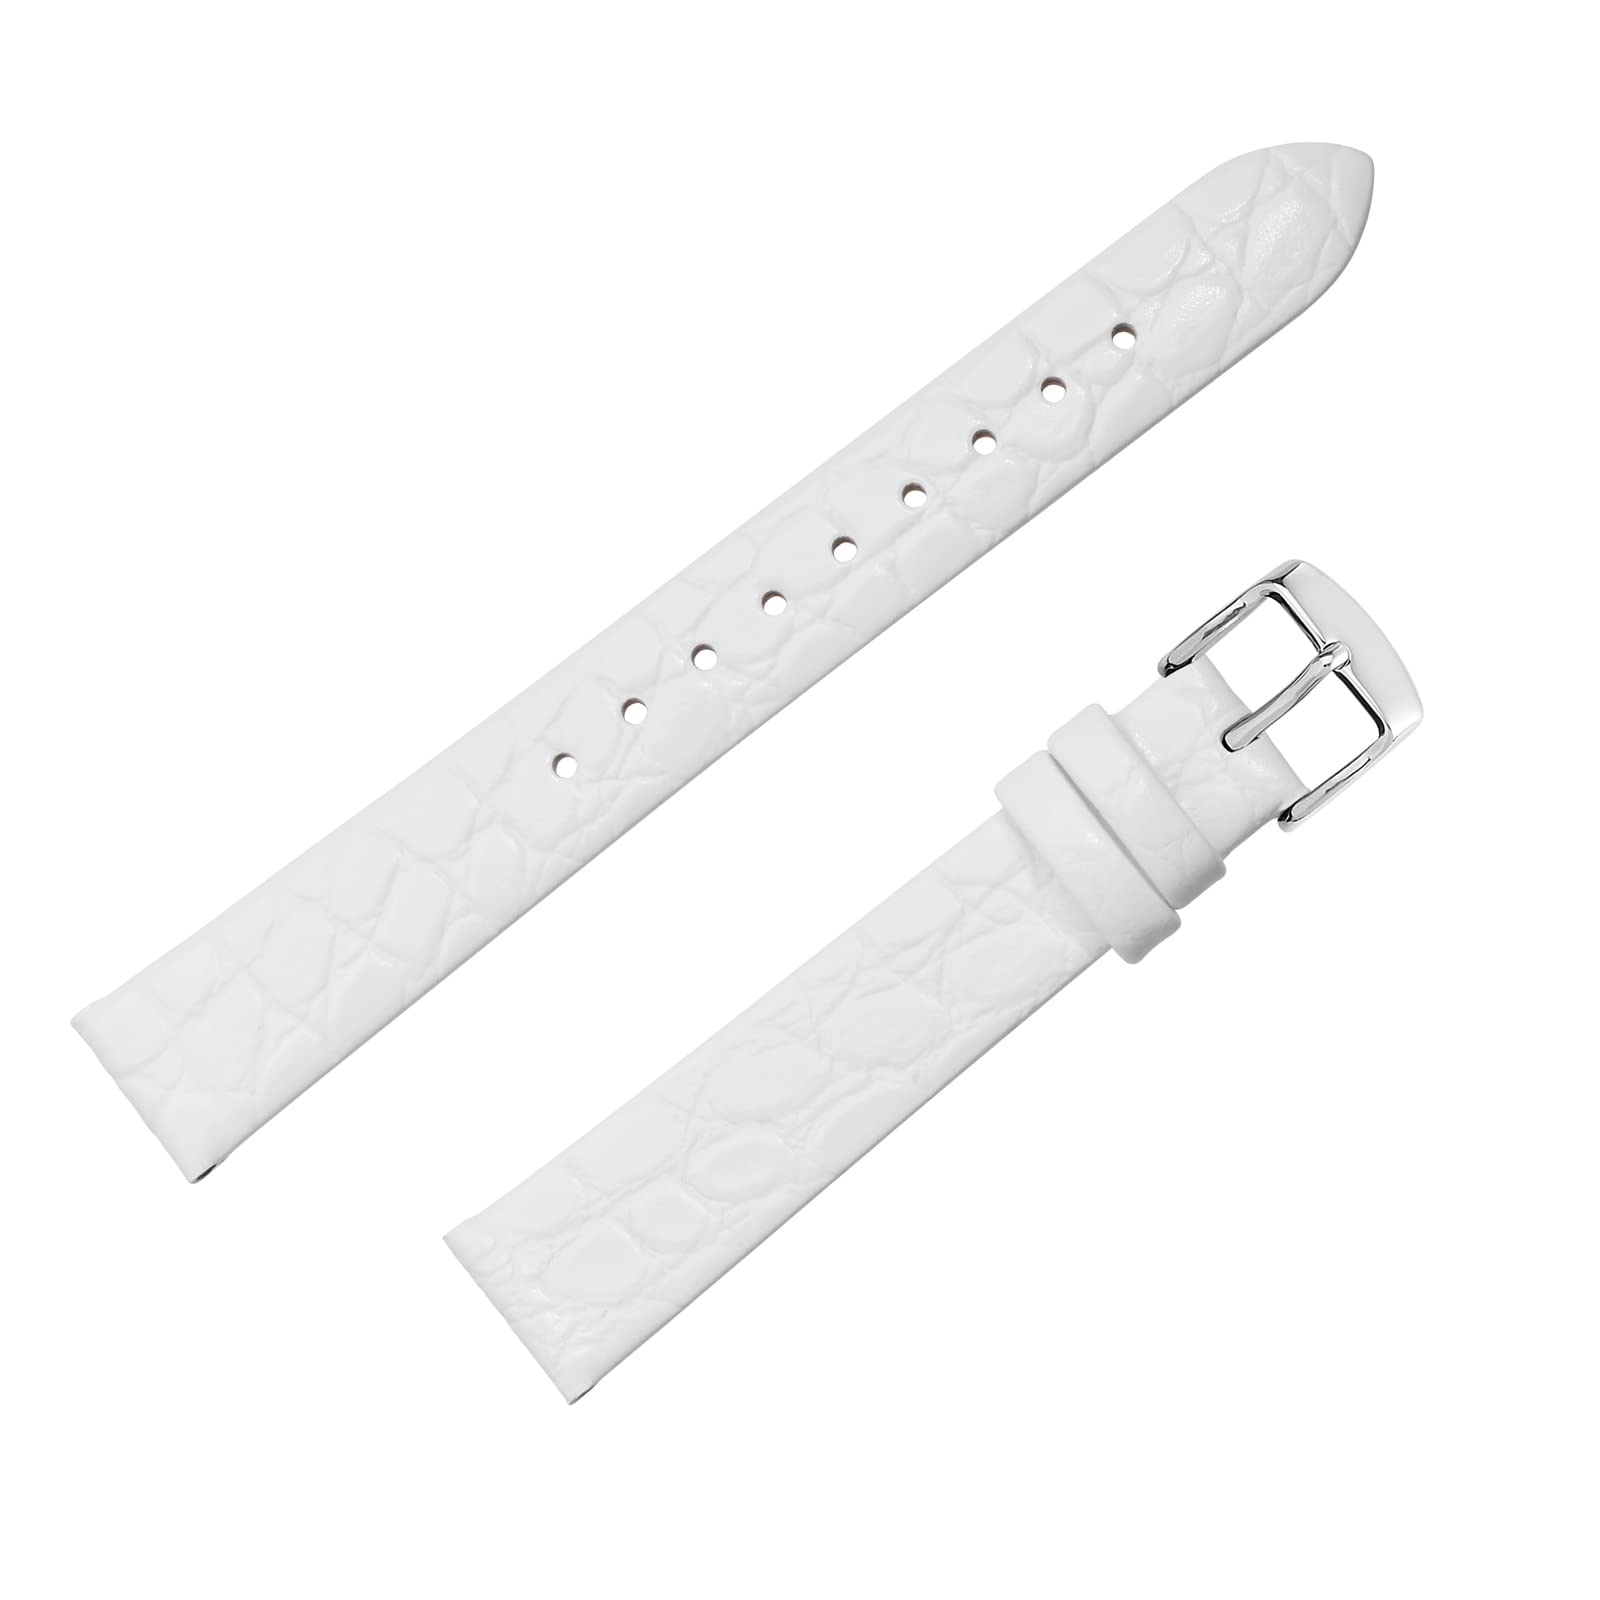 BISONSTRAP Leather Watch Straps, Soft Replacement Bands with Polished Buckle, 8mm 10mm 12mm 14mm 16mm 18mm 19mm 20mm